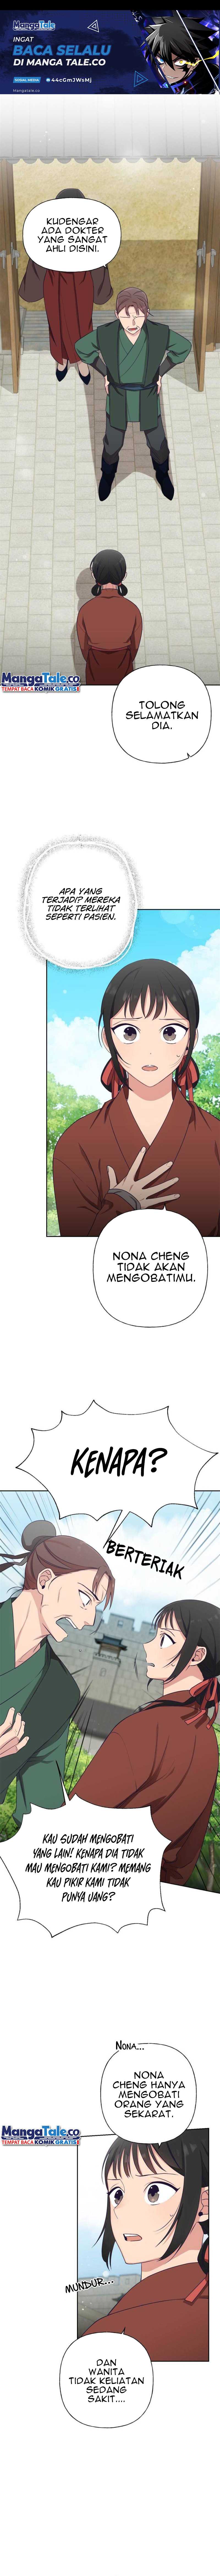 The Marvelous Dr. Jiaoniang Chapter 03